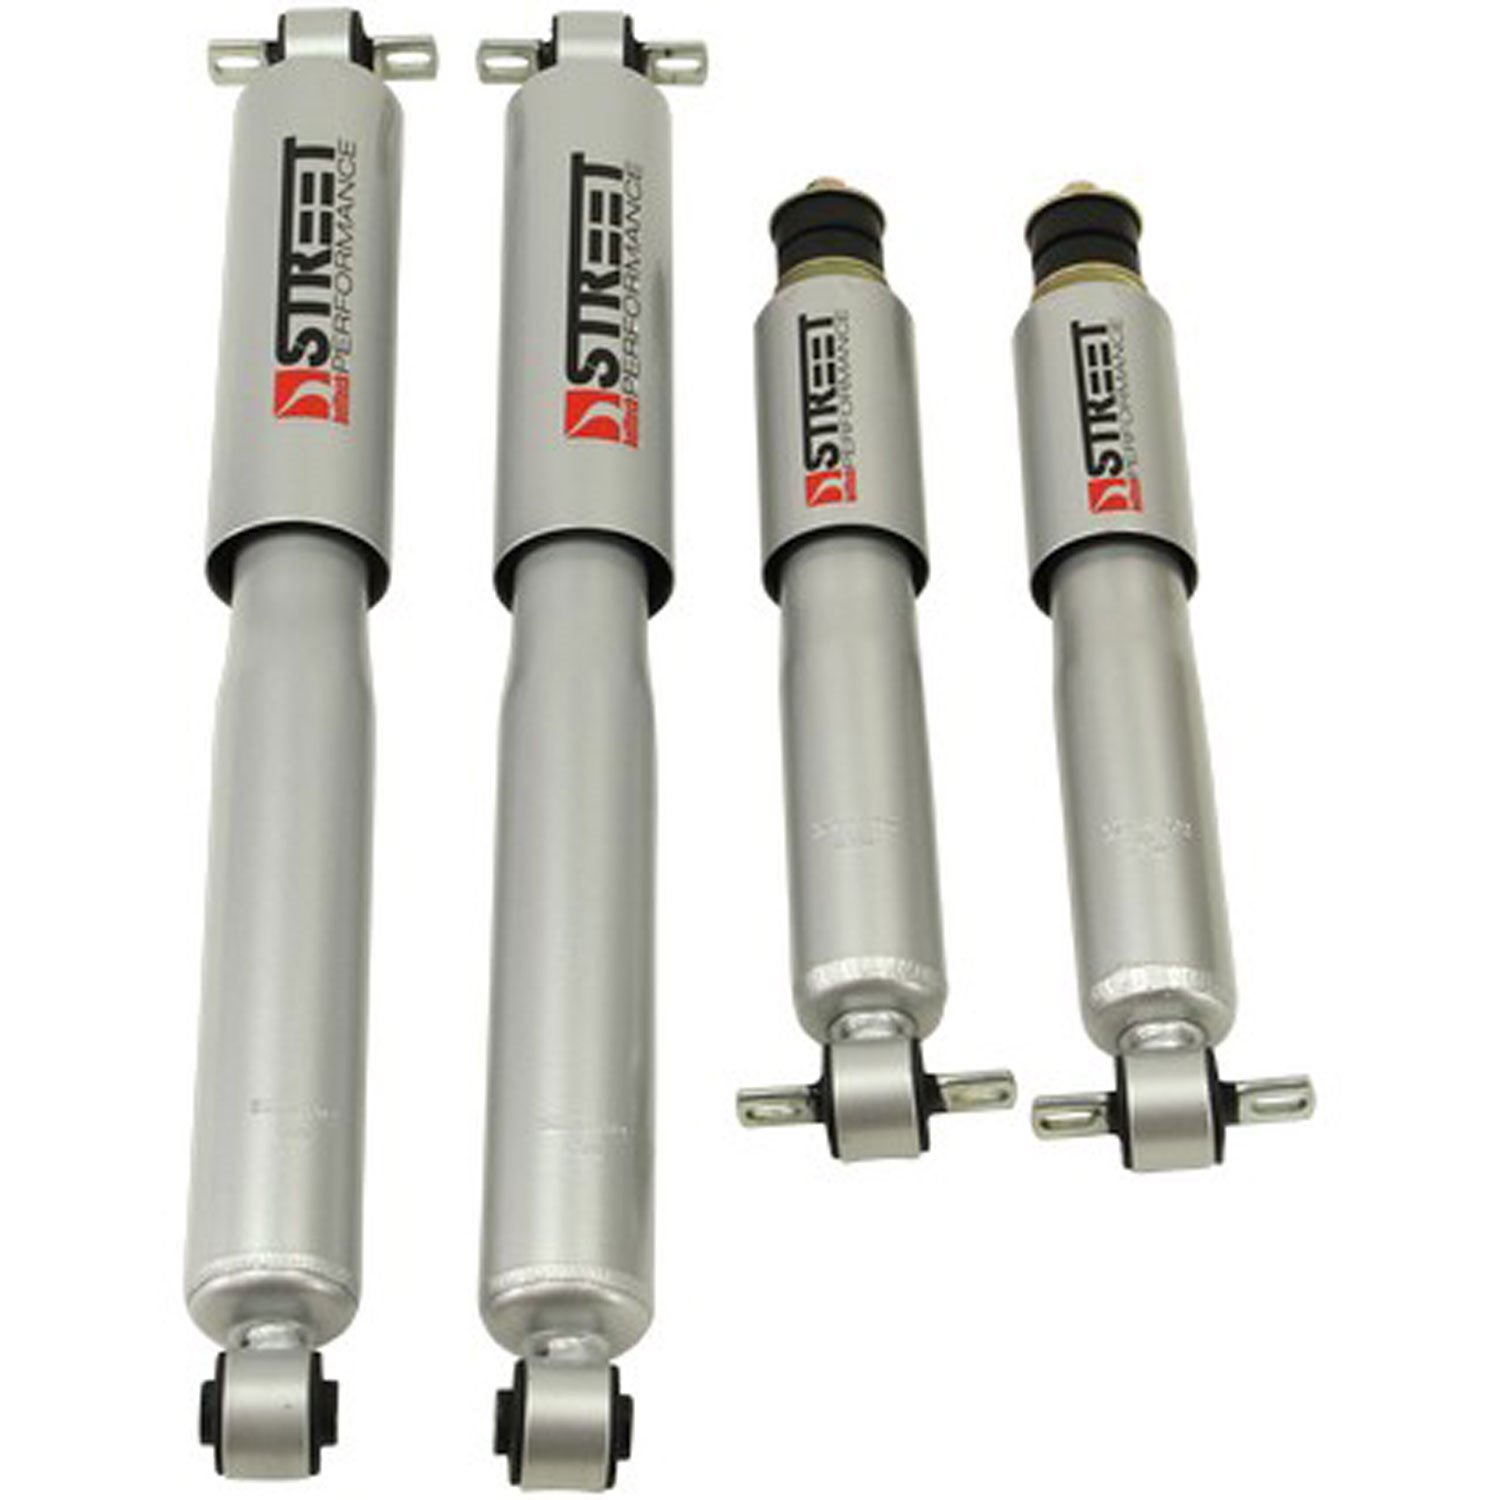 Street Performance Shock Set includes (2) 146-10102I Front Shocks and (2) 146-2212ID Rear Shocks